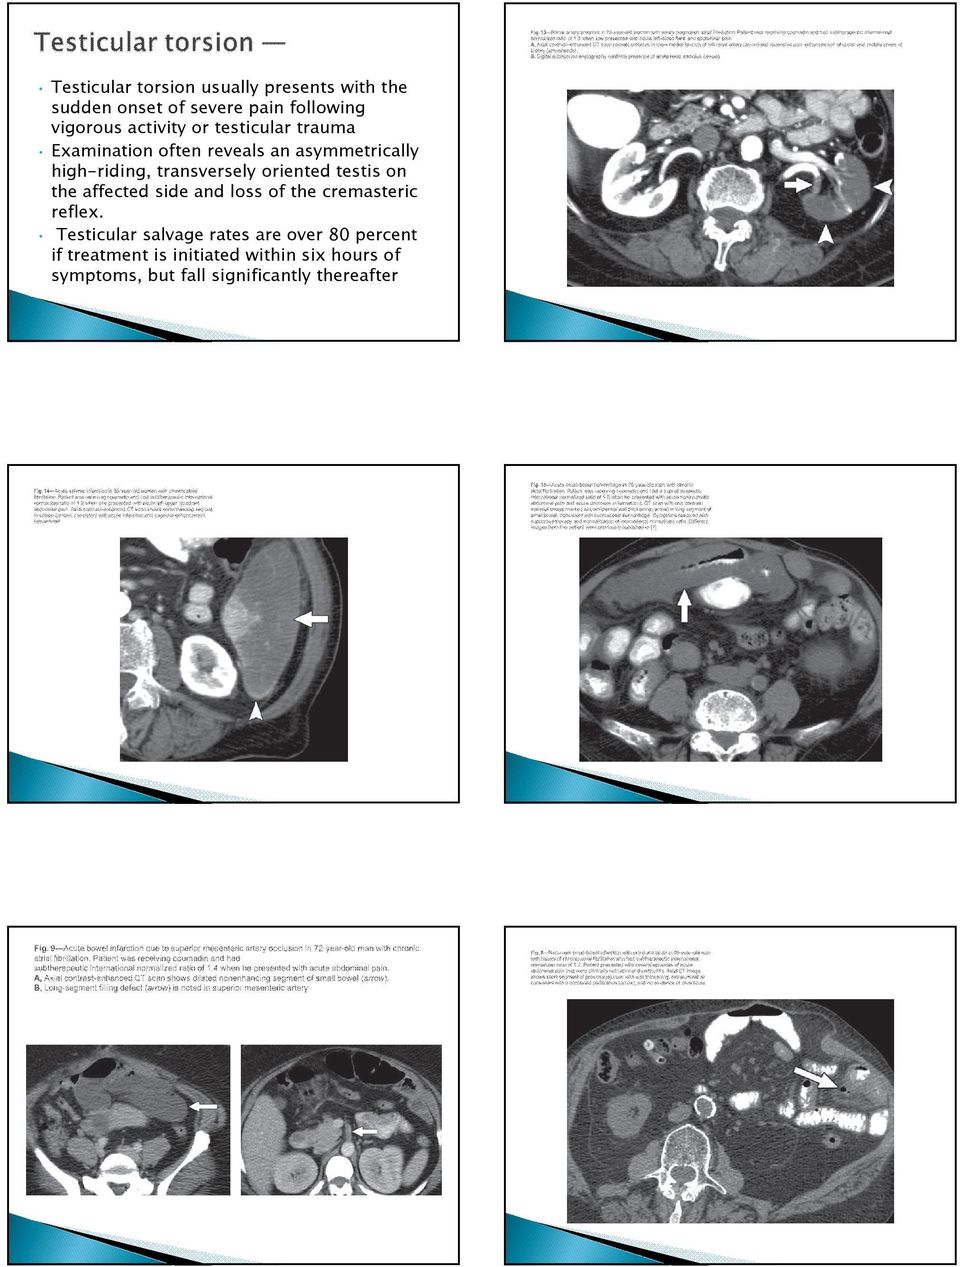 oriented testis on the affected side and loss of the cremasteric reflex.